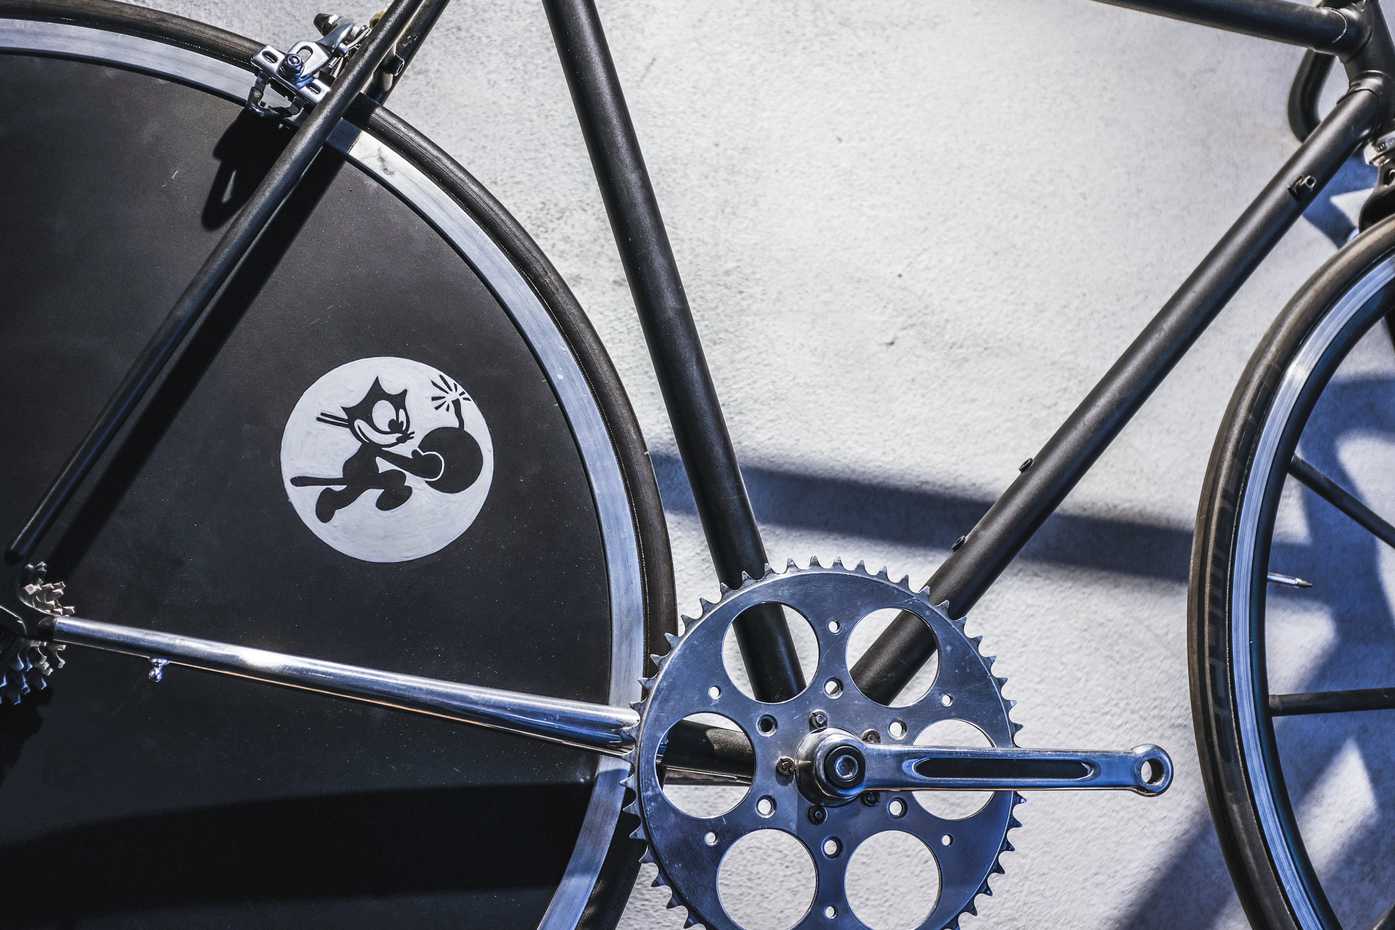 A bike decorated with a decal of Felix the Cat